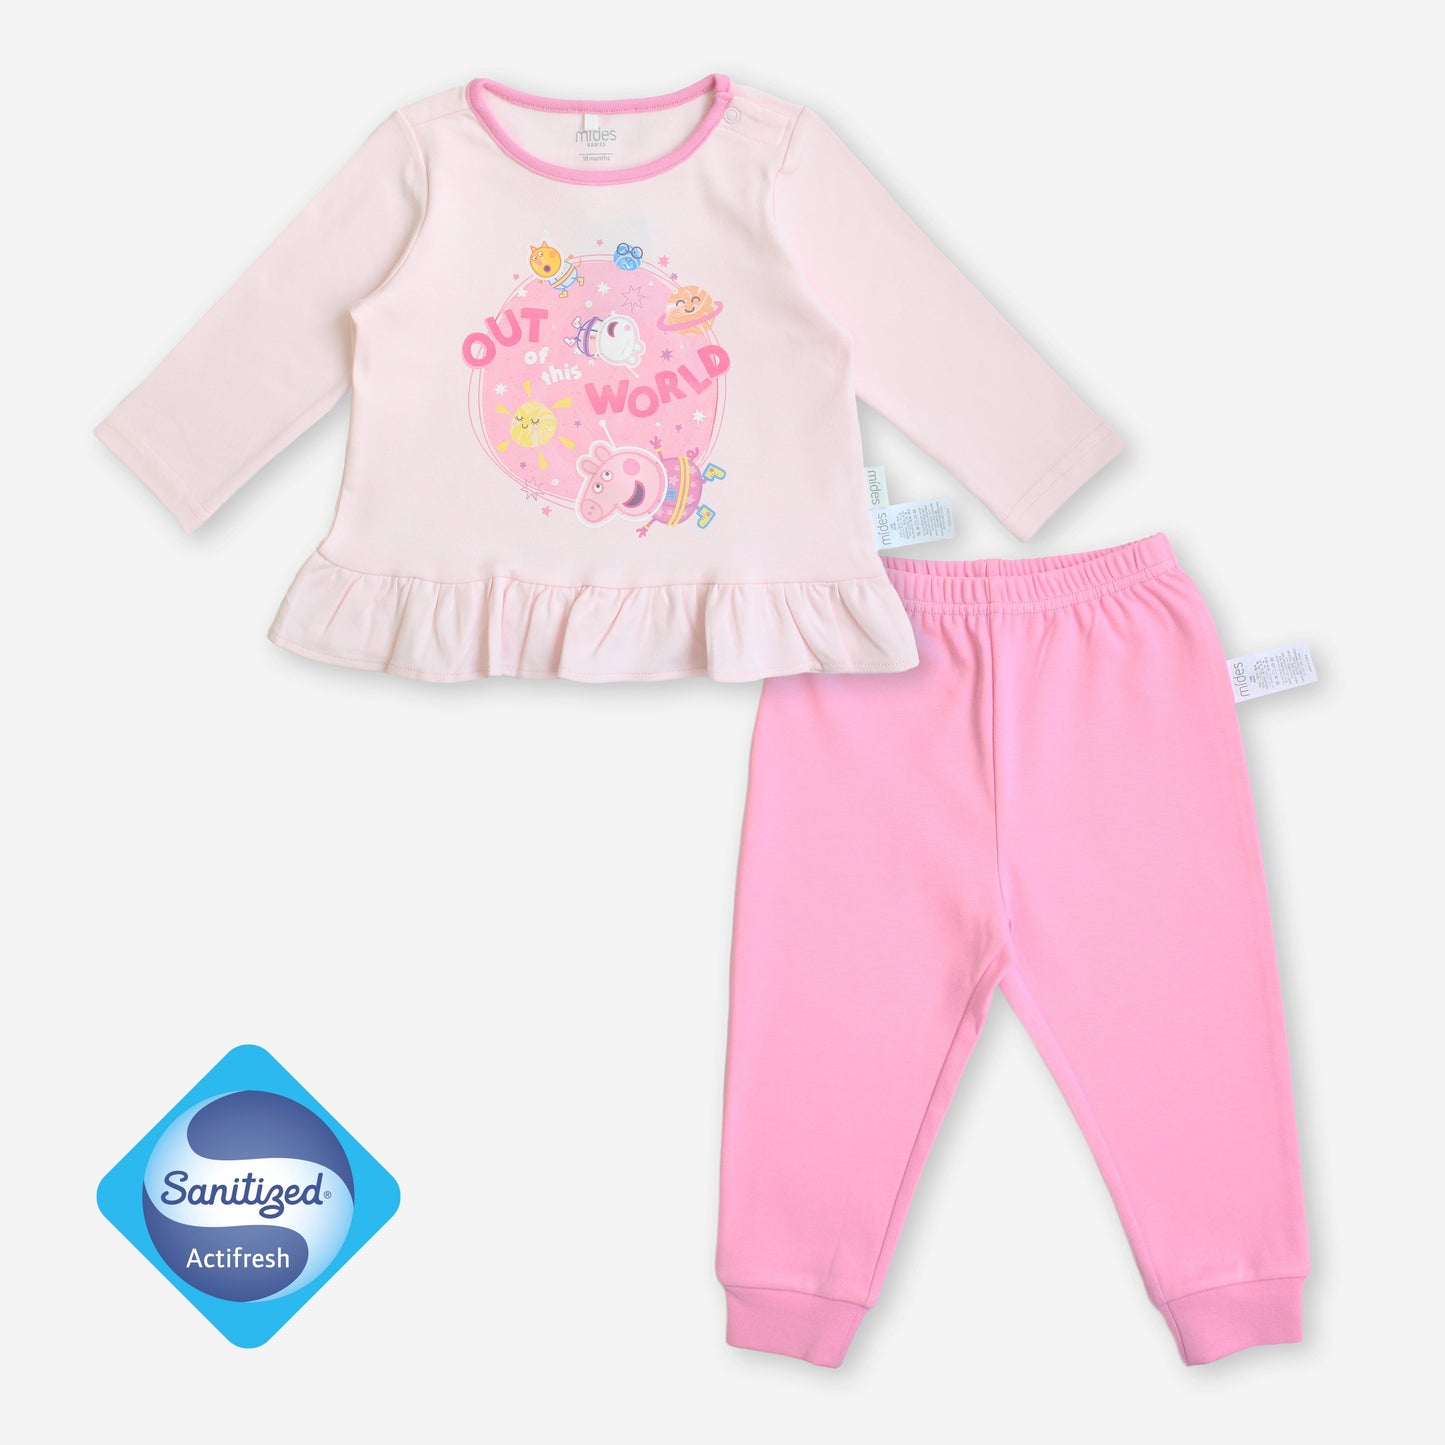 Peppa Pig Lunar double-sided crewneck pajama set pink Sanitized?  Antimicrobial technology